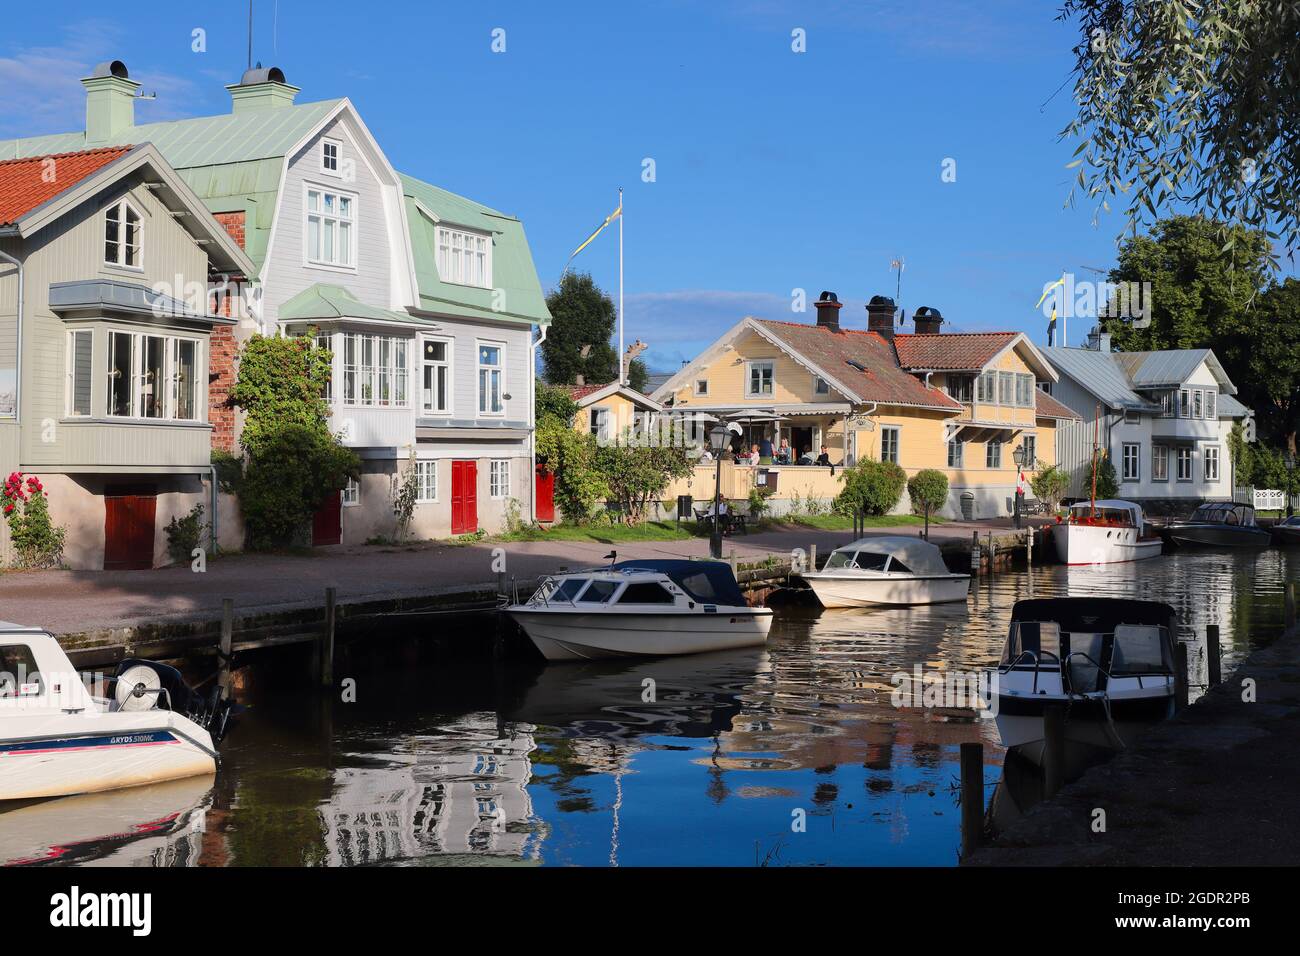 Trosa, Sweden - August 8, 2021: View of the builings and pleasure boats  alongside the Trosa river. Stock Photo